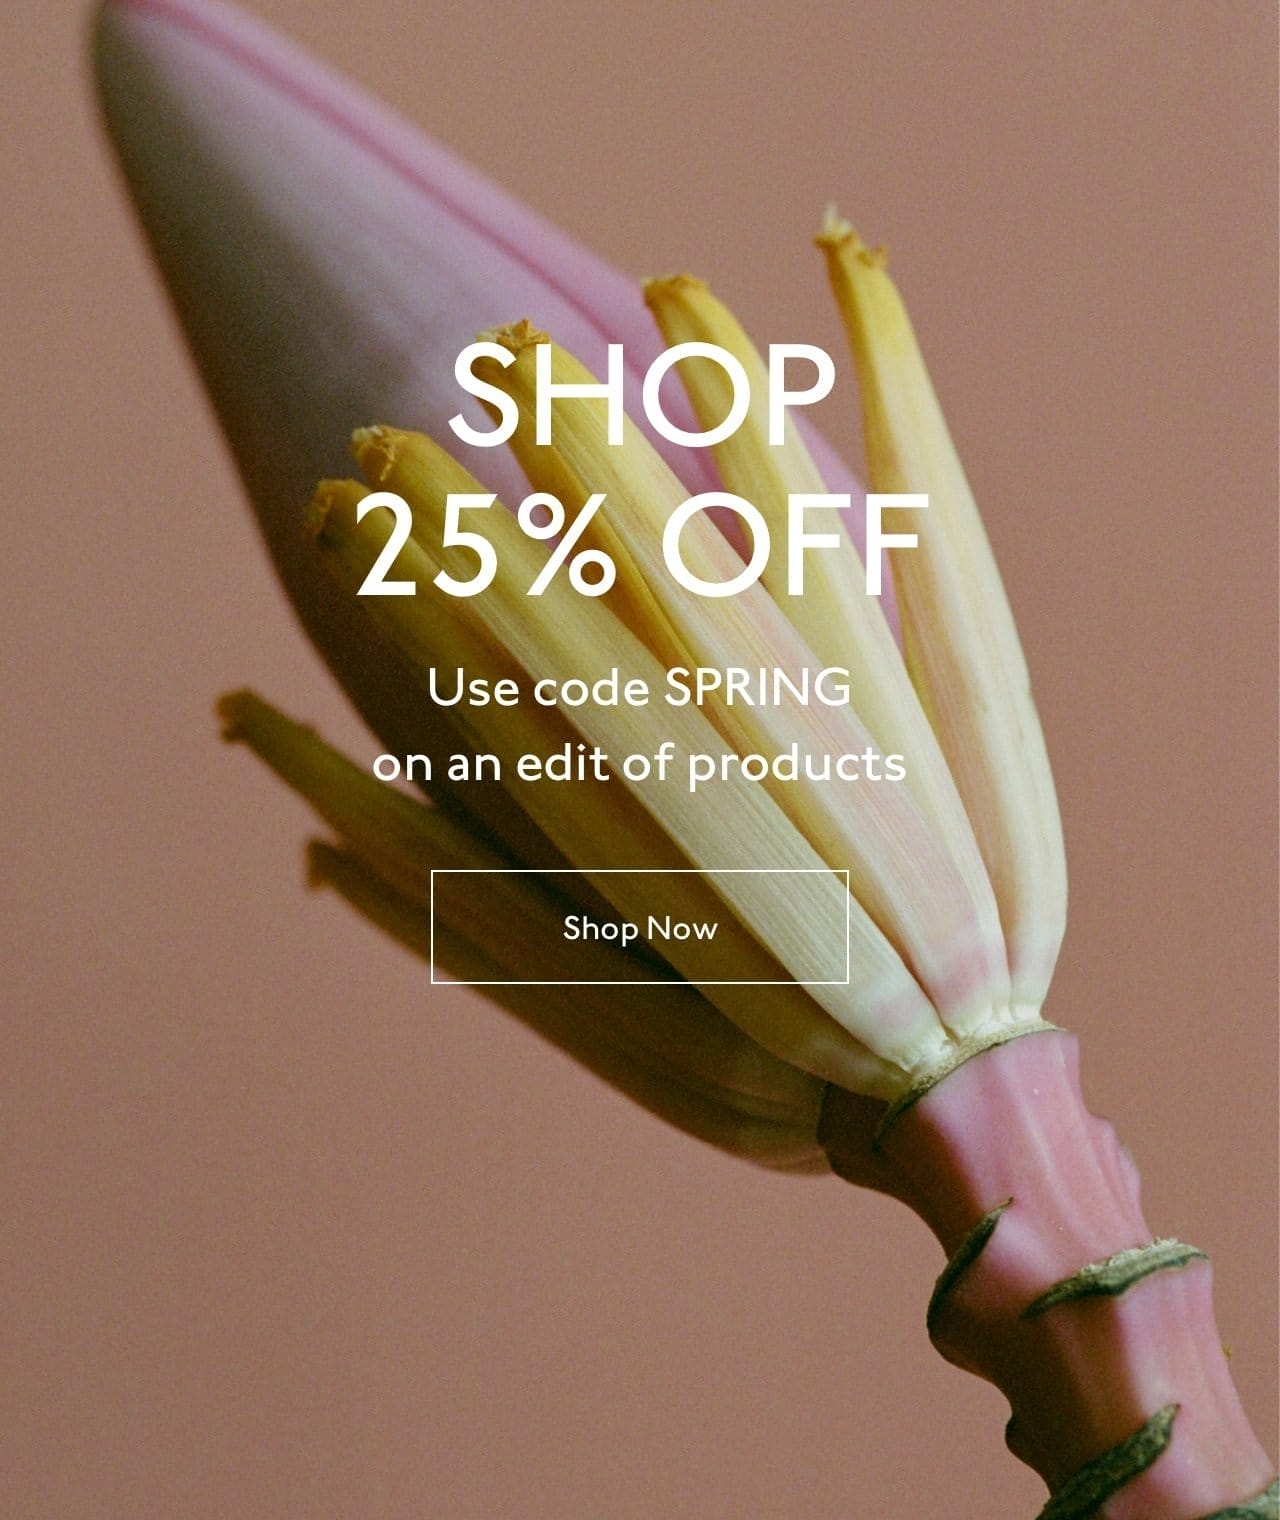 For a limited time shop 25% off an edit of products with code SPRING.